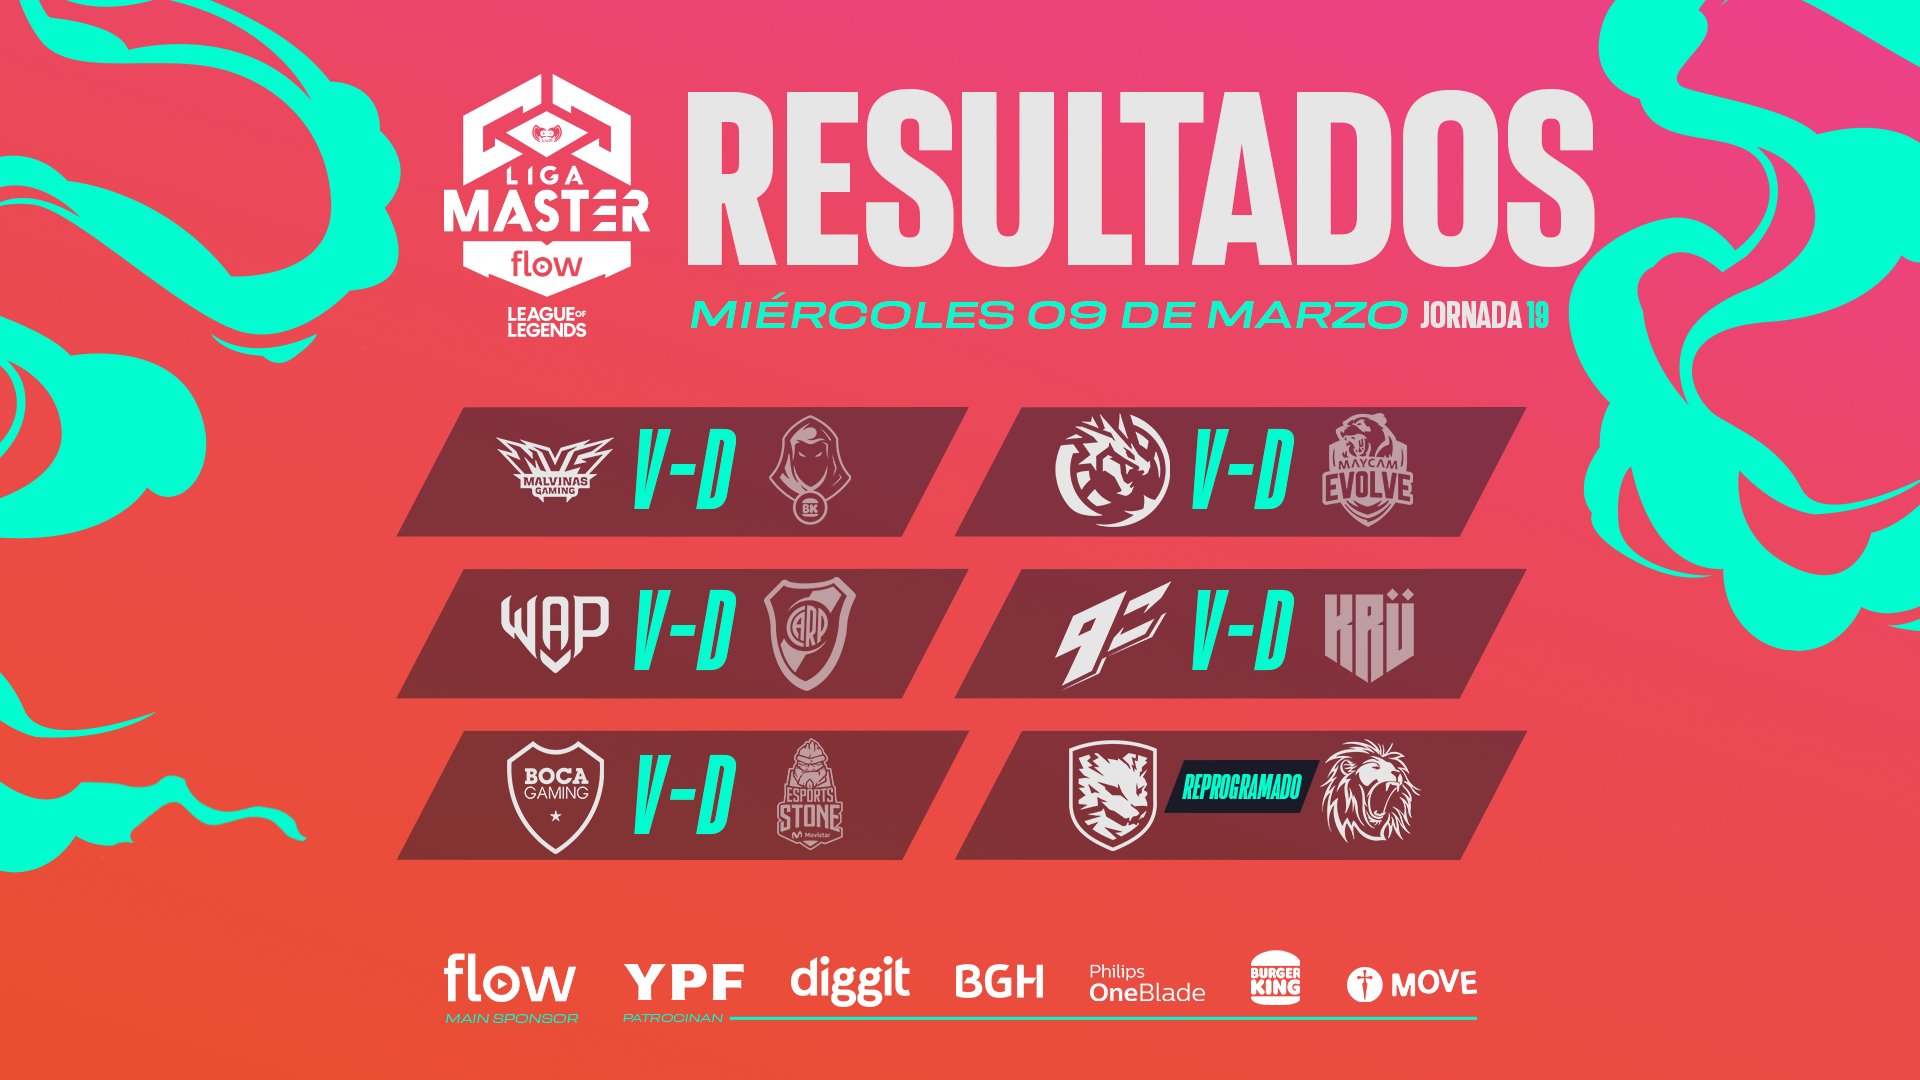 Master Flow League: Malvinas and Undead BK play for playoffs